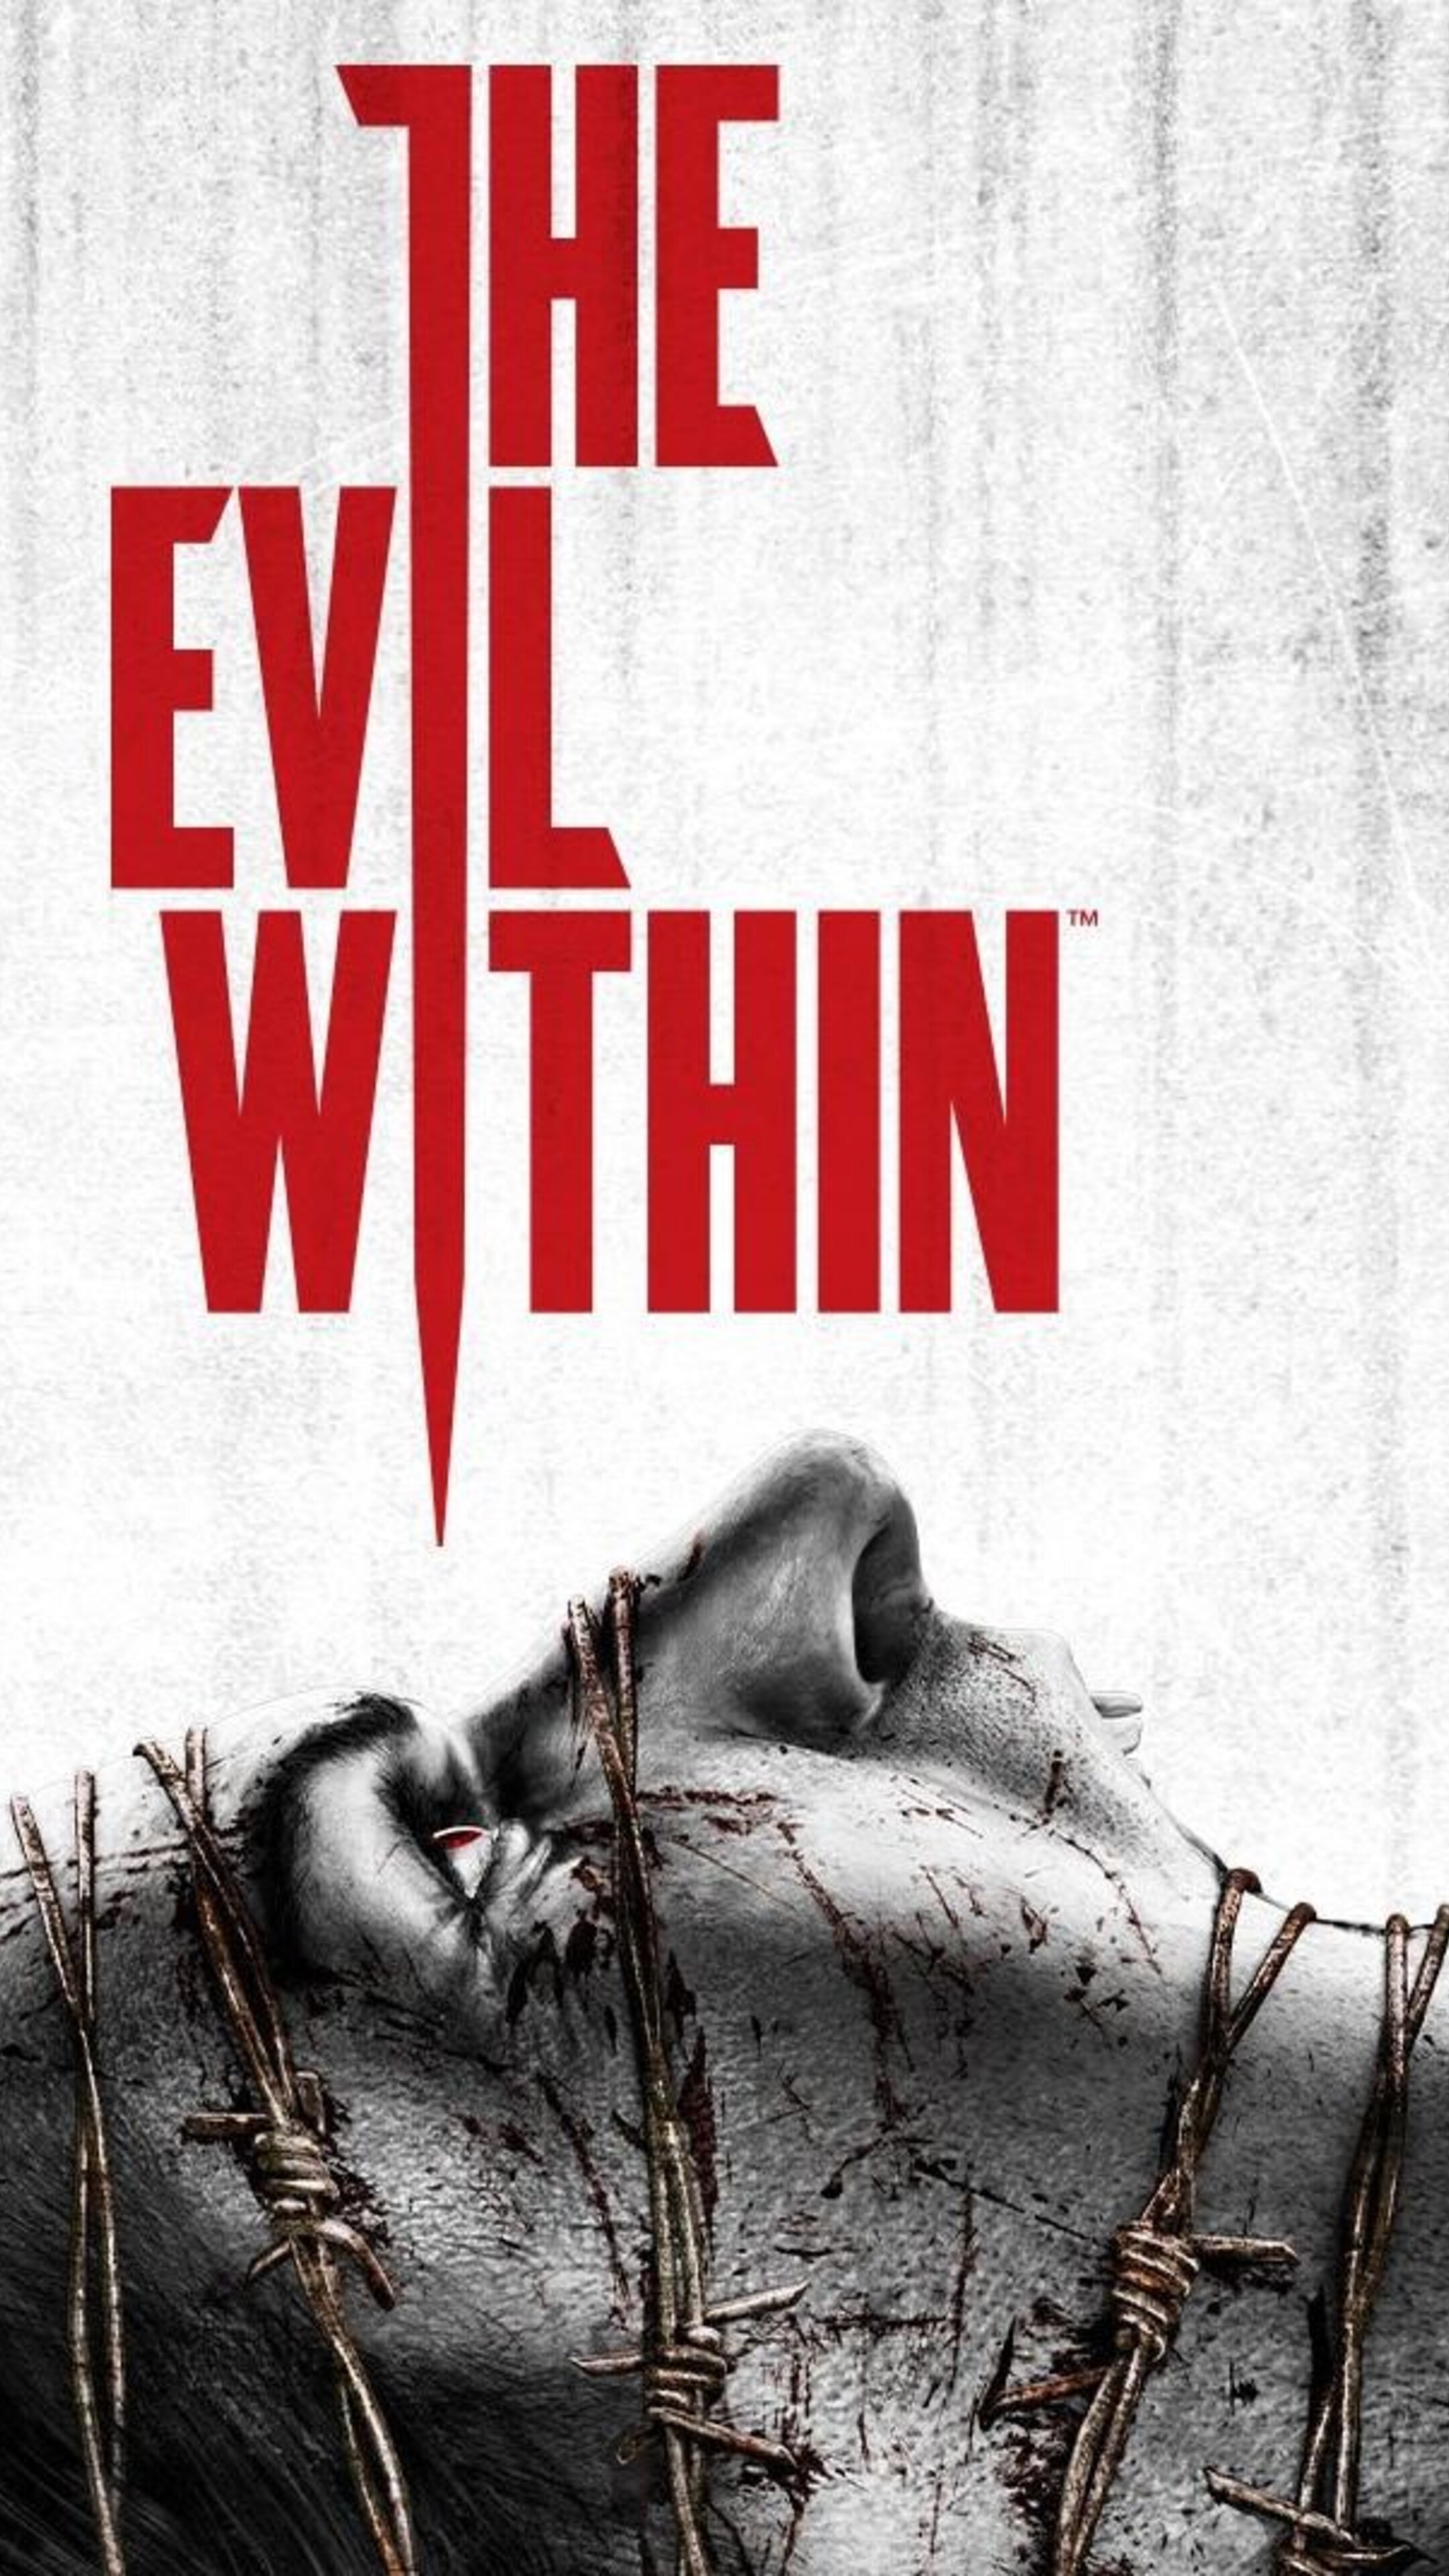 Steam evil within фото 107